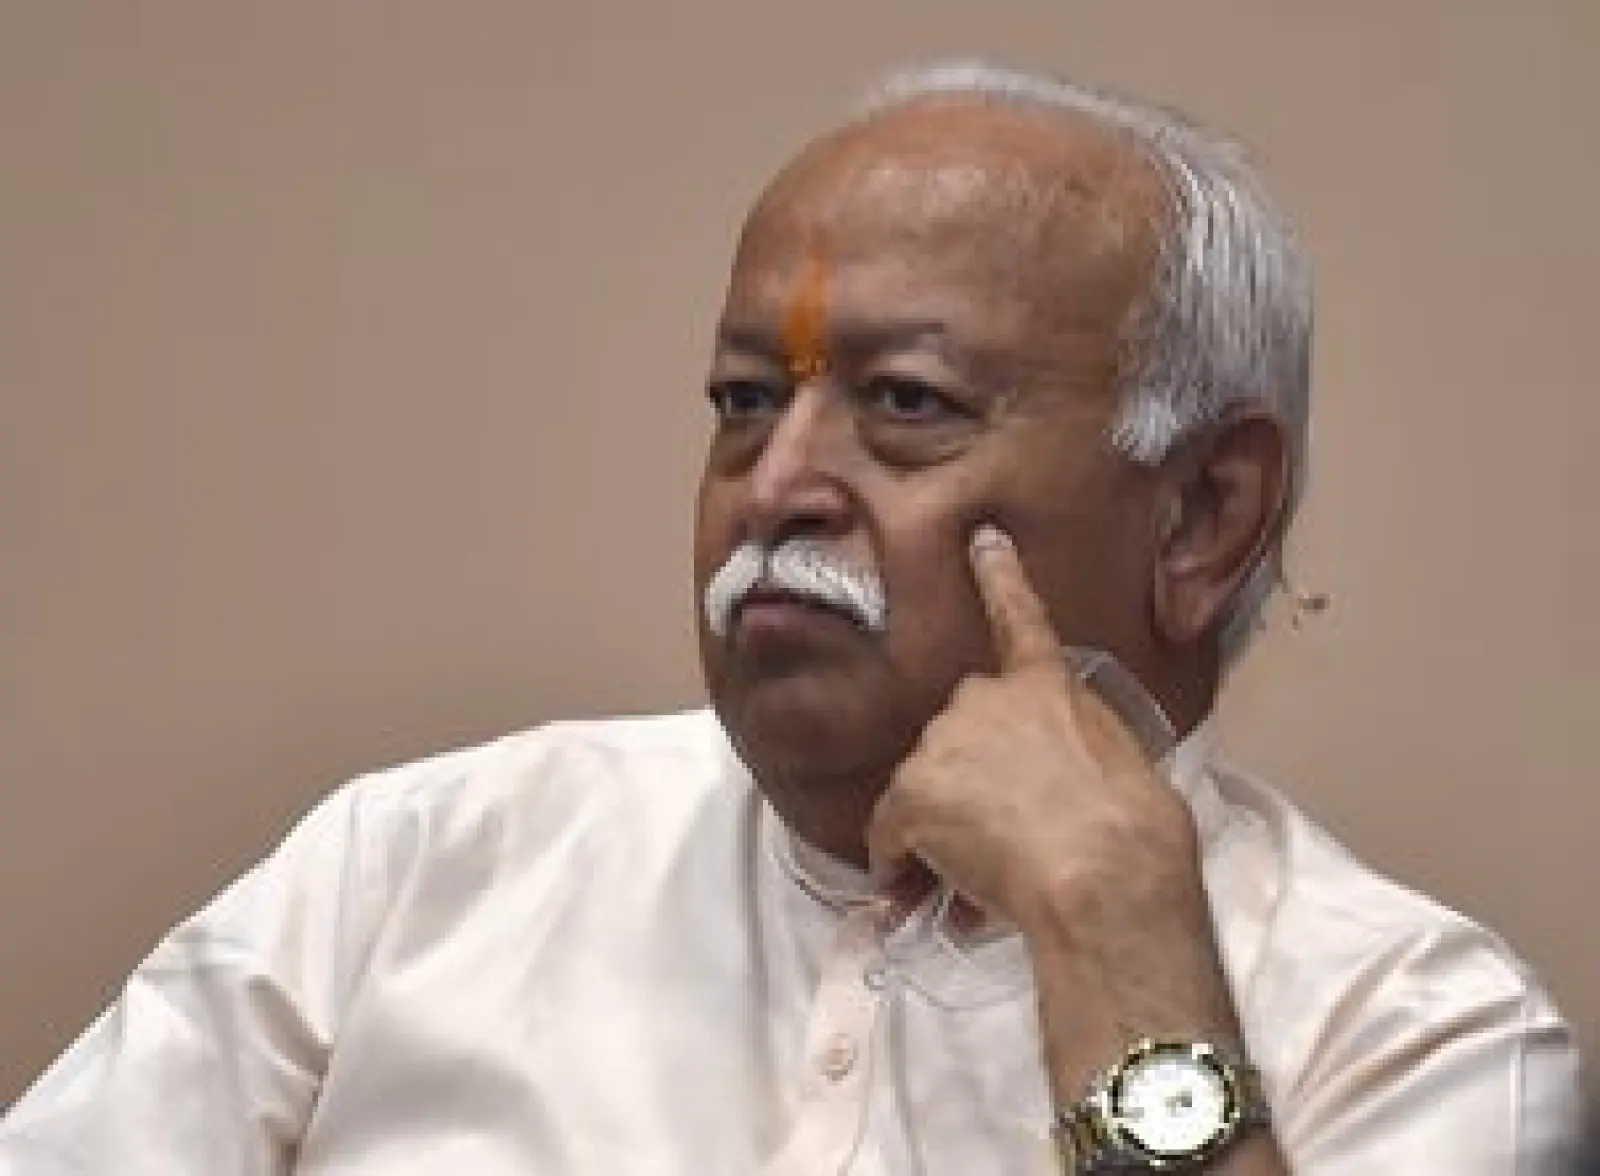 'The country is moving in the right direction, everything will be fine soon', said Mohan Bhagwat while addressing the people